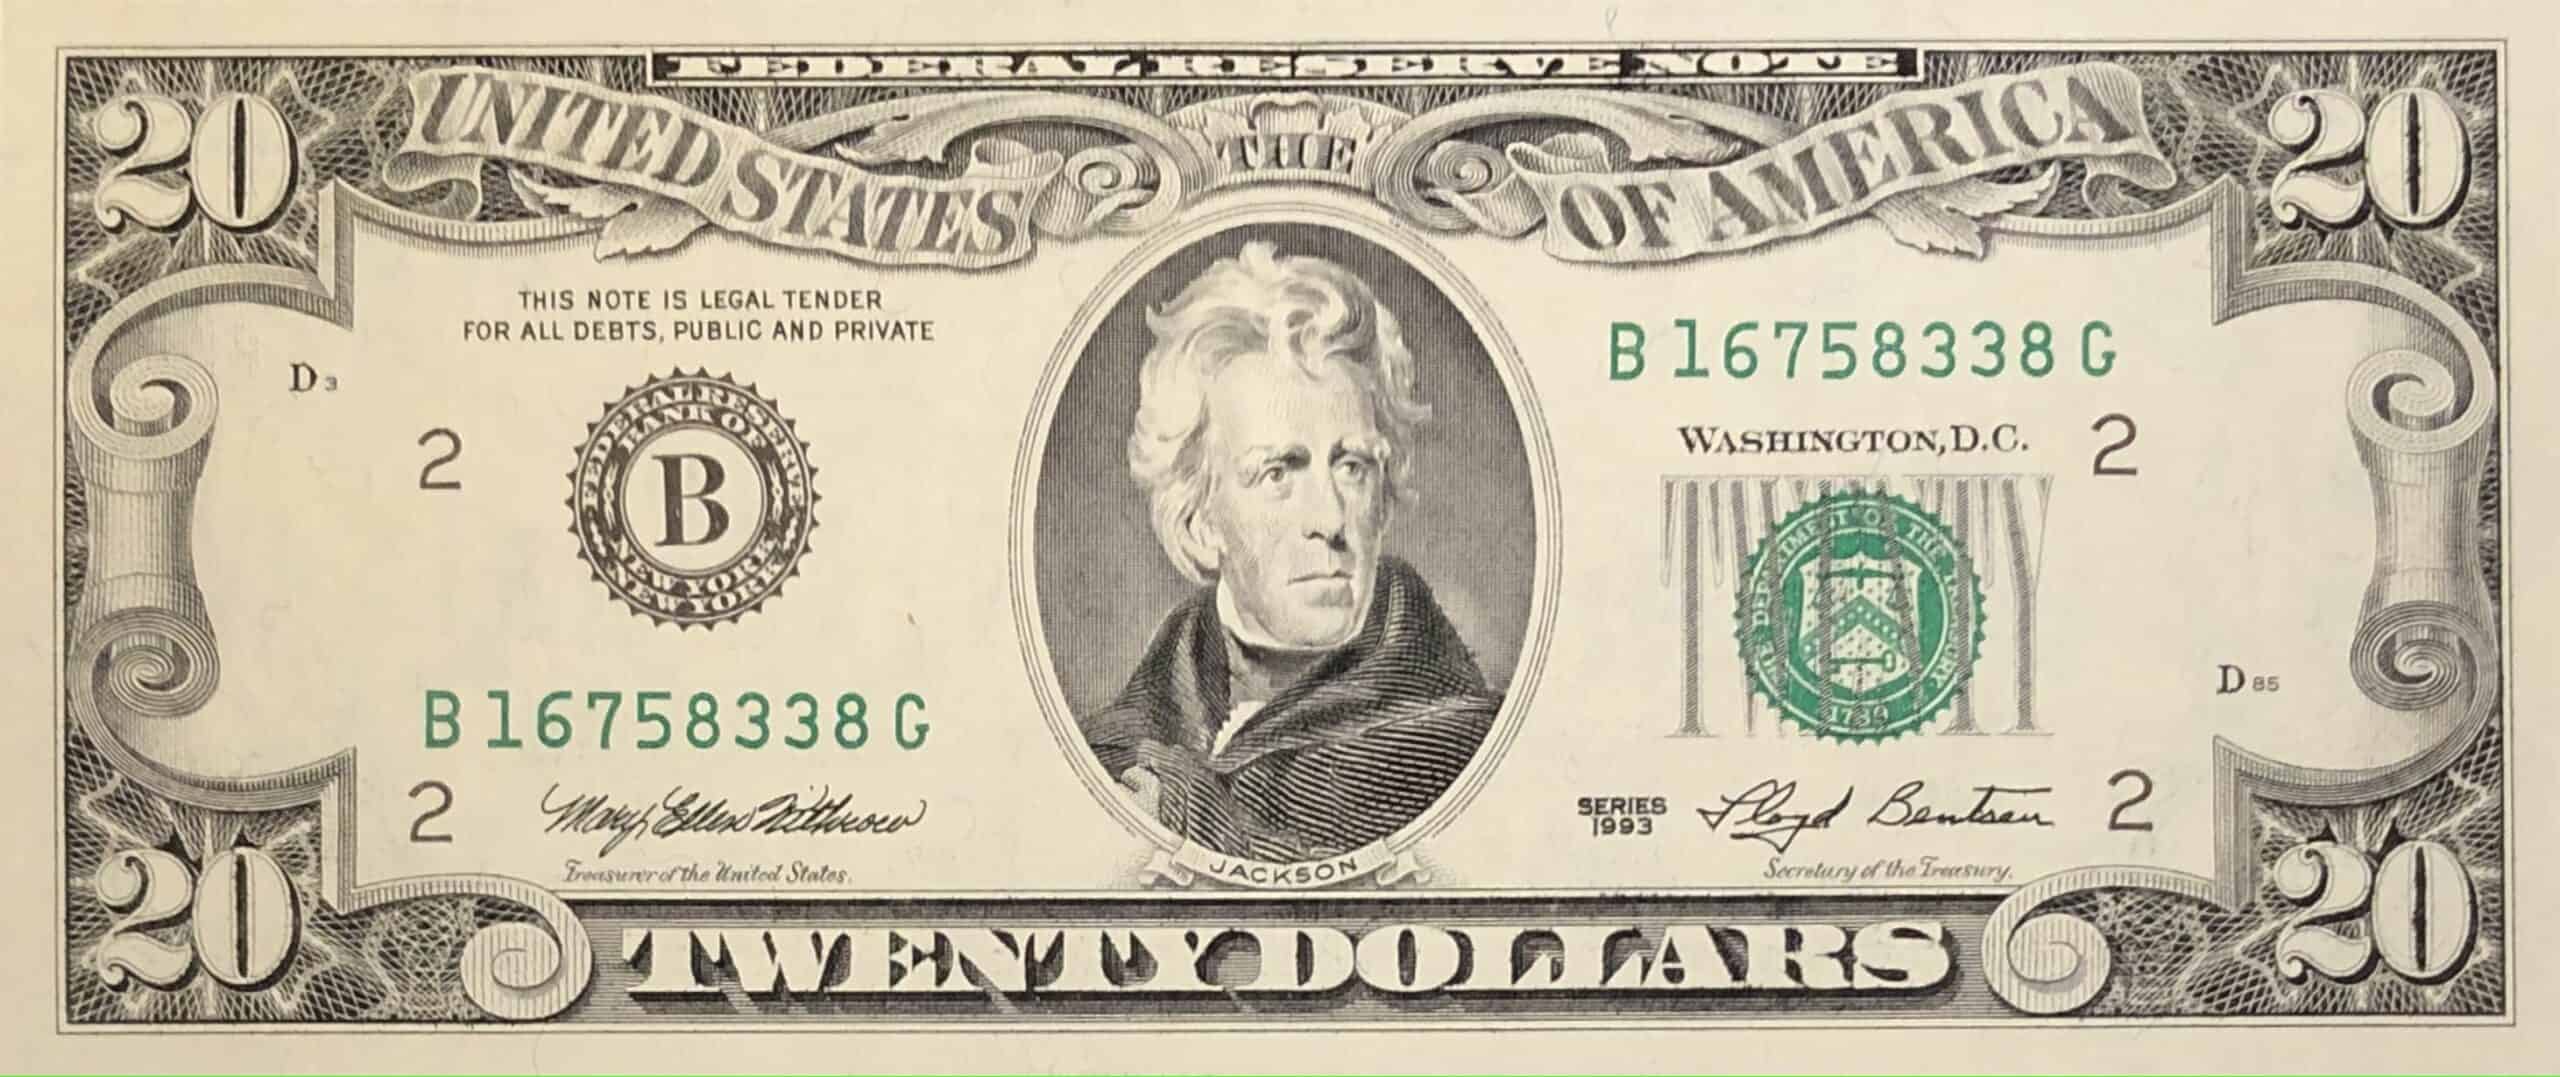 The Obverse of the 1993 20 Dollar Bill